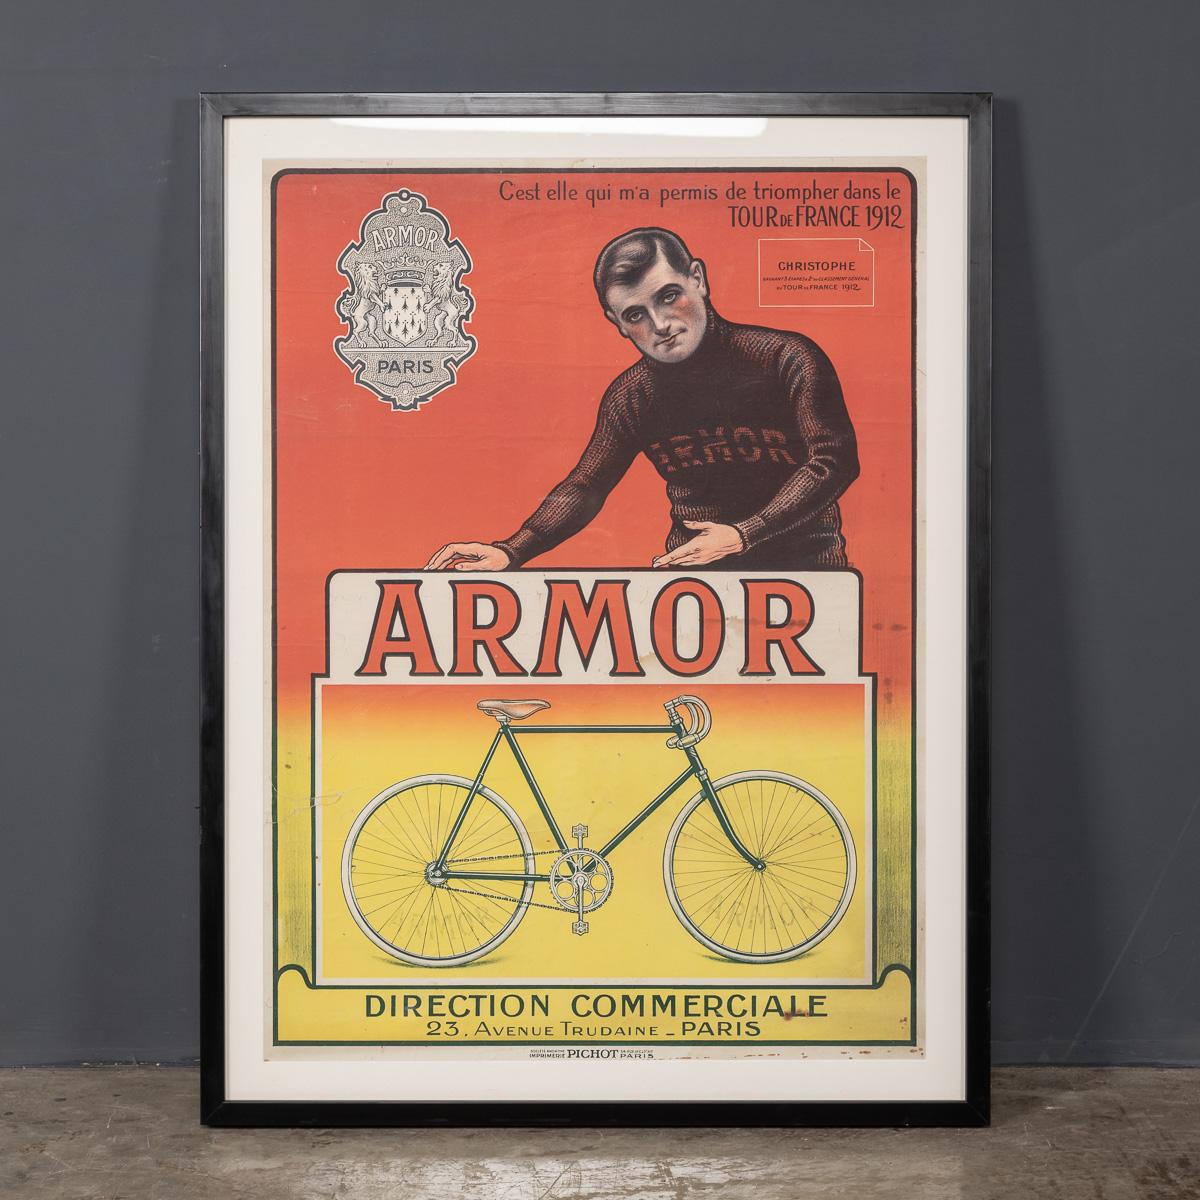 “She allowed me to triumph in the 1912 Tour de France” says Eugène Christophe the Parisian hero of the Tour de France, an original advertisement for Armor Bicycles from the 1912. This superb large posters comes with a timeless made to measure custom